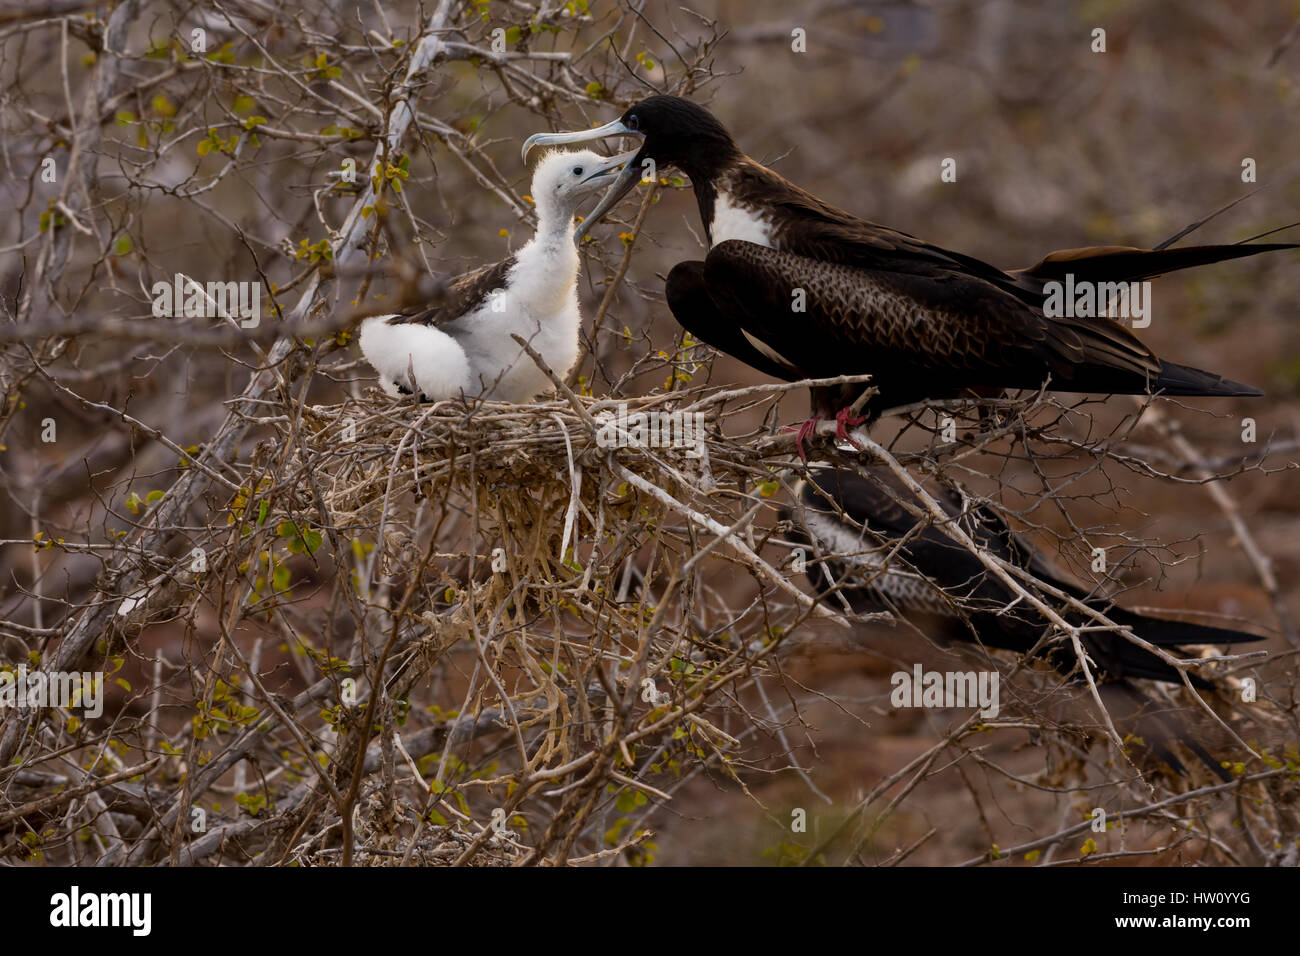 A female Magnificent Frigatebird feeds her chick on North Seymour Island in the Galapagos Island chain. Stock Photo